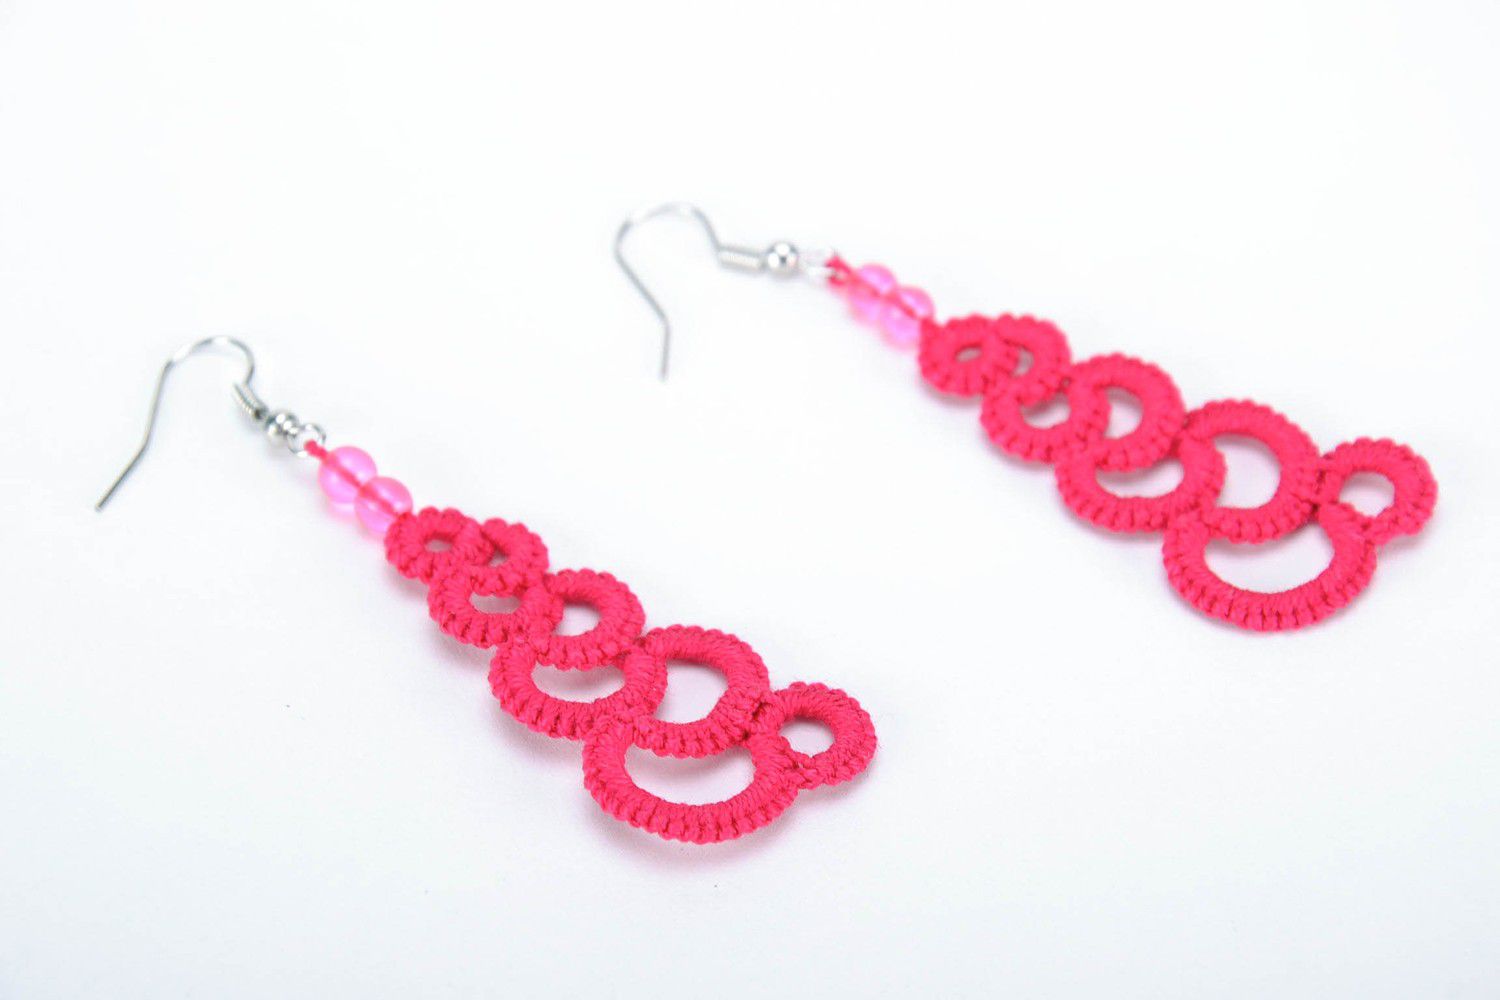 Crimson earrings made from woven lace photo 1